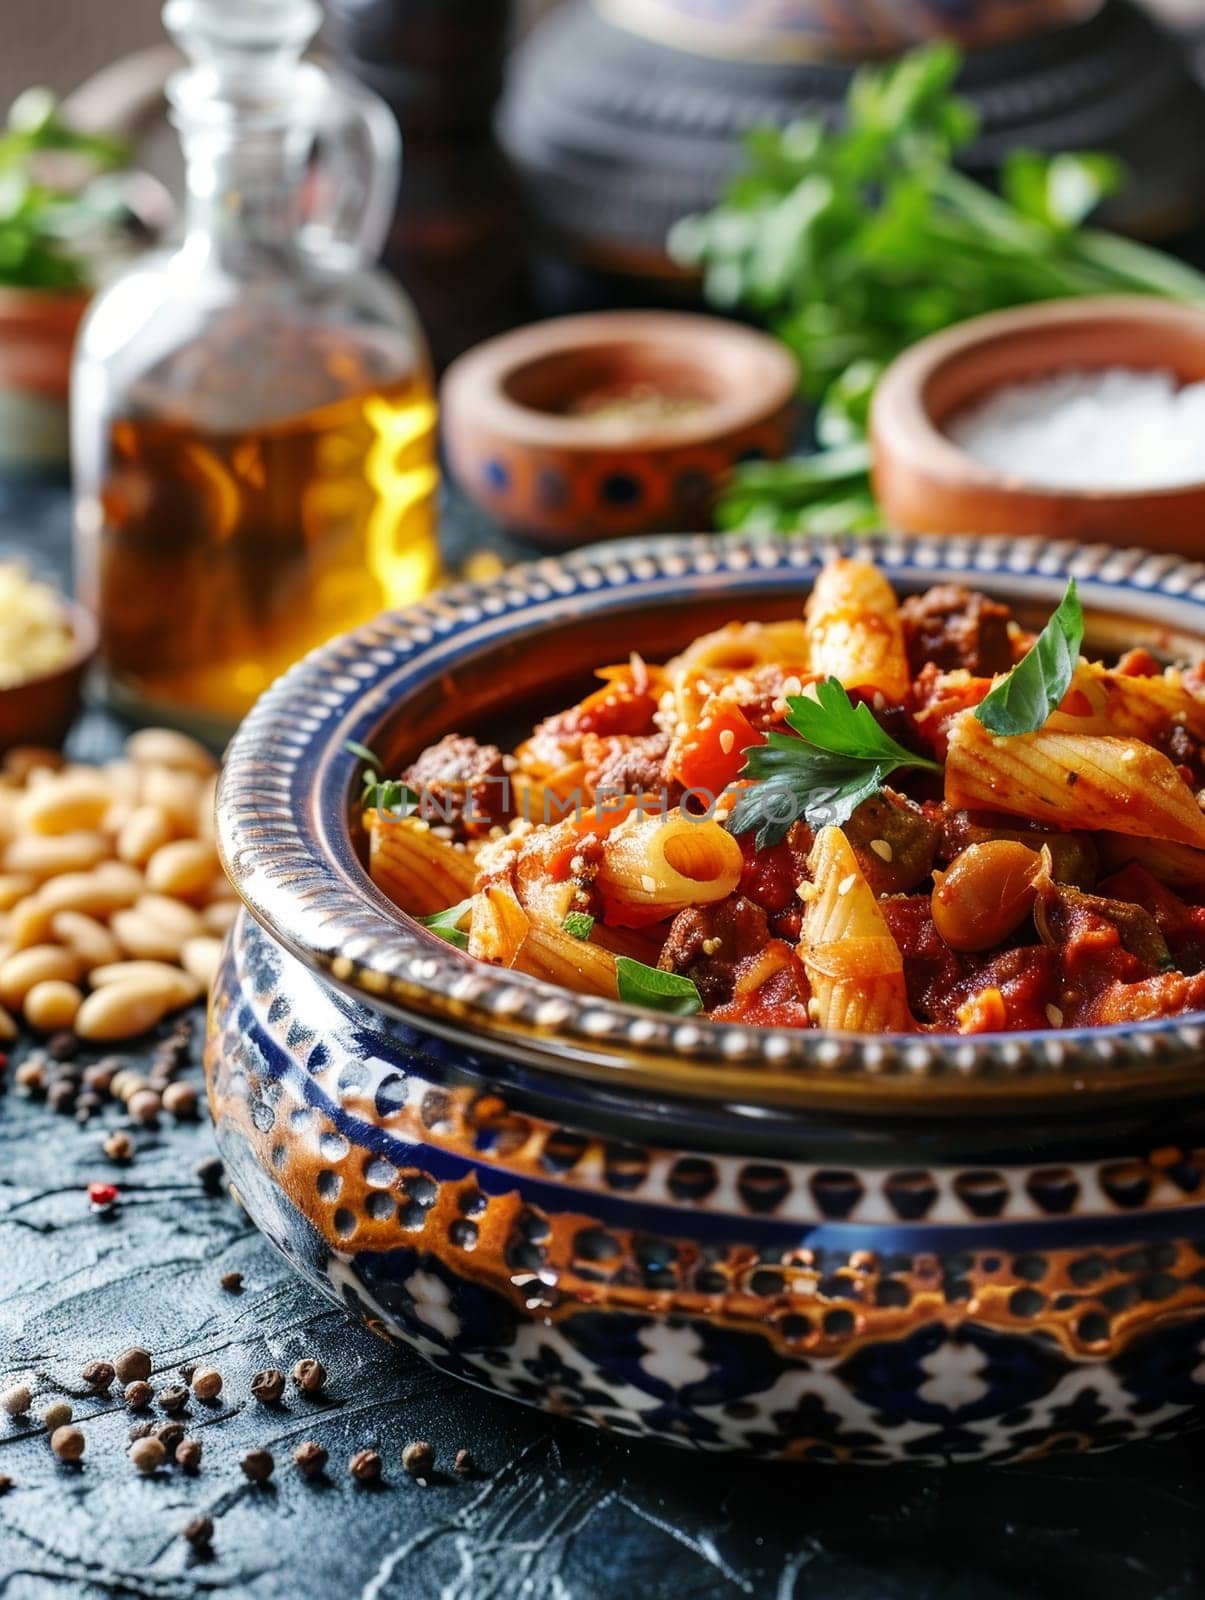 Libyan mbakbaka, a traditional pasta dish cooked in a tagine with a spicy tomato sauce and meat. This ethnic comfort food showcases the bold flavors and cooking traditions of Libyan cuisine. by sfinks